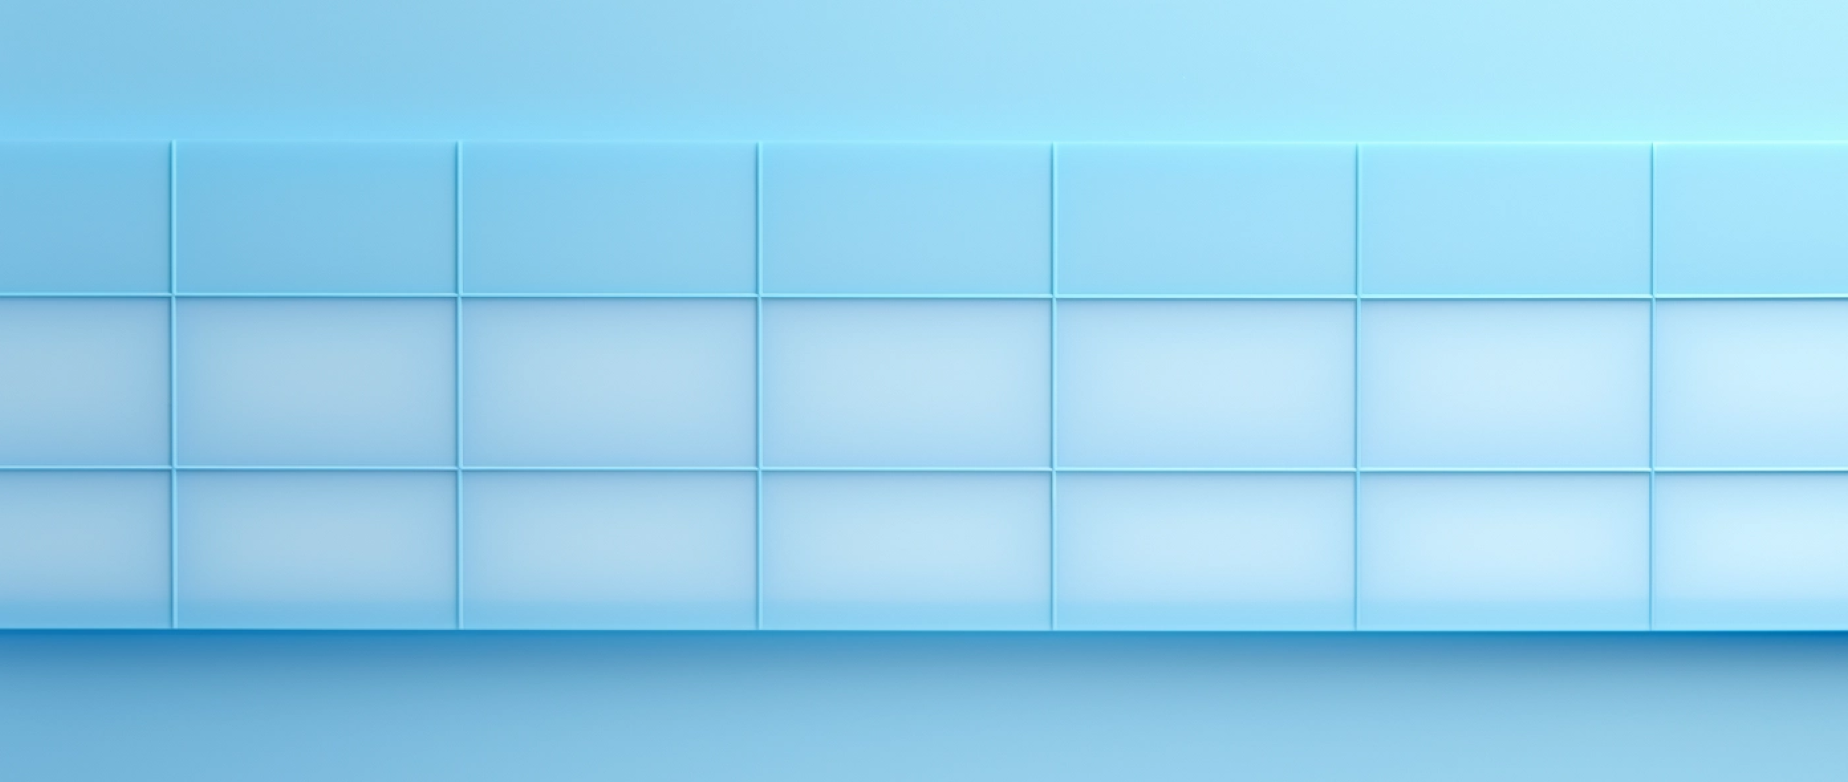 An empty light blue grid with squares.